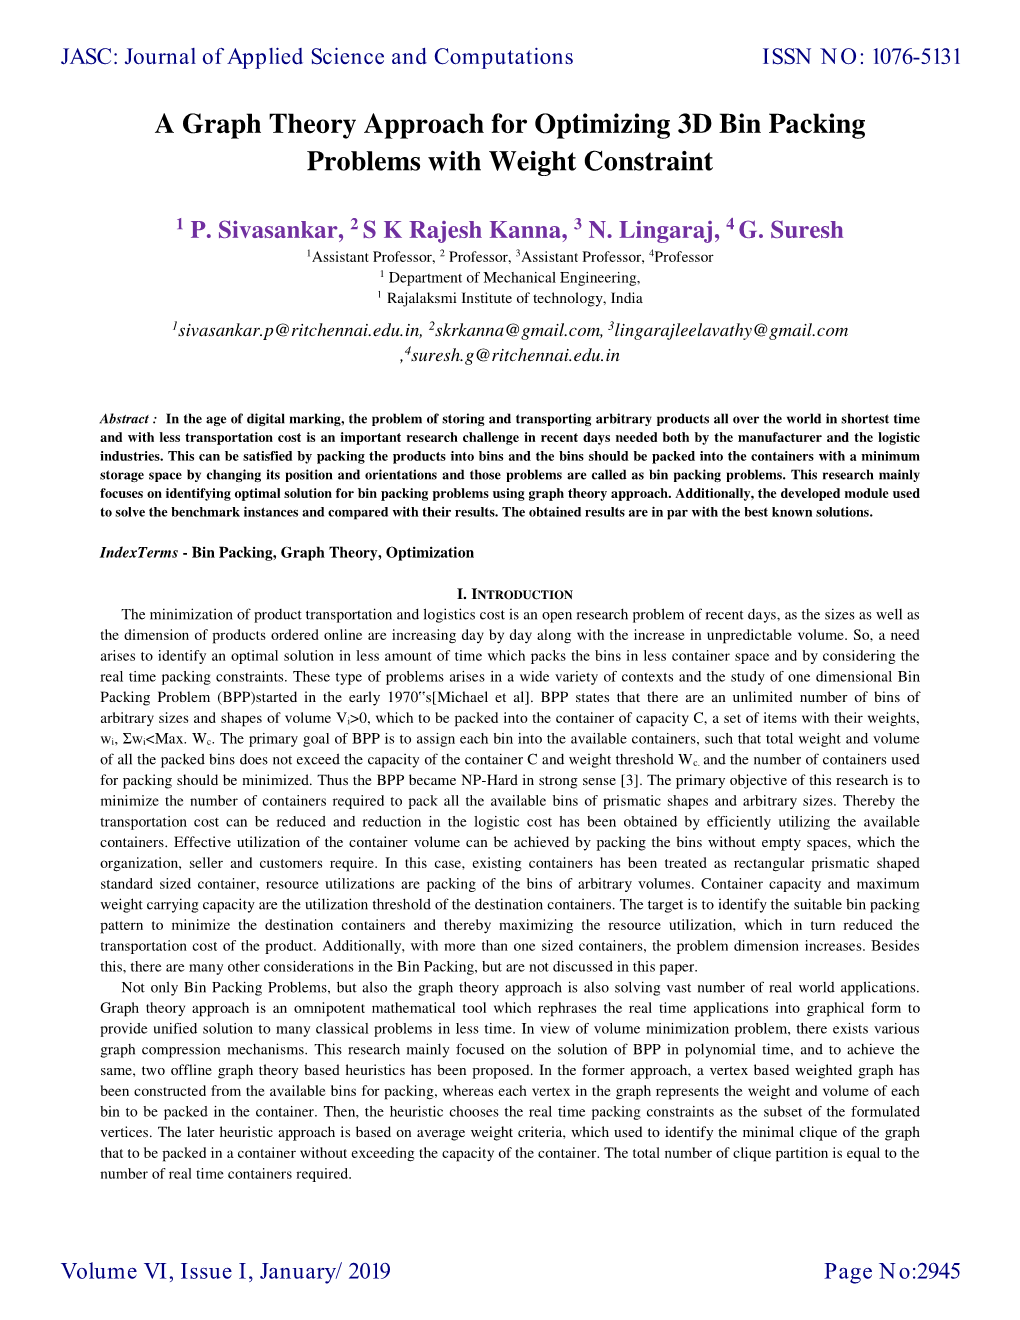 A Graph Theory Approach for Optimizing 3D Bin Packing Problems with Weight Constraint